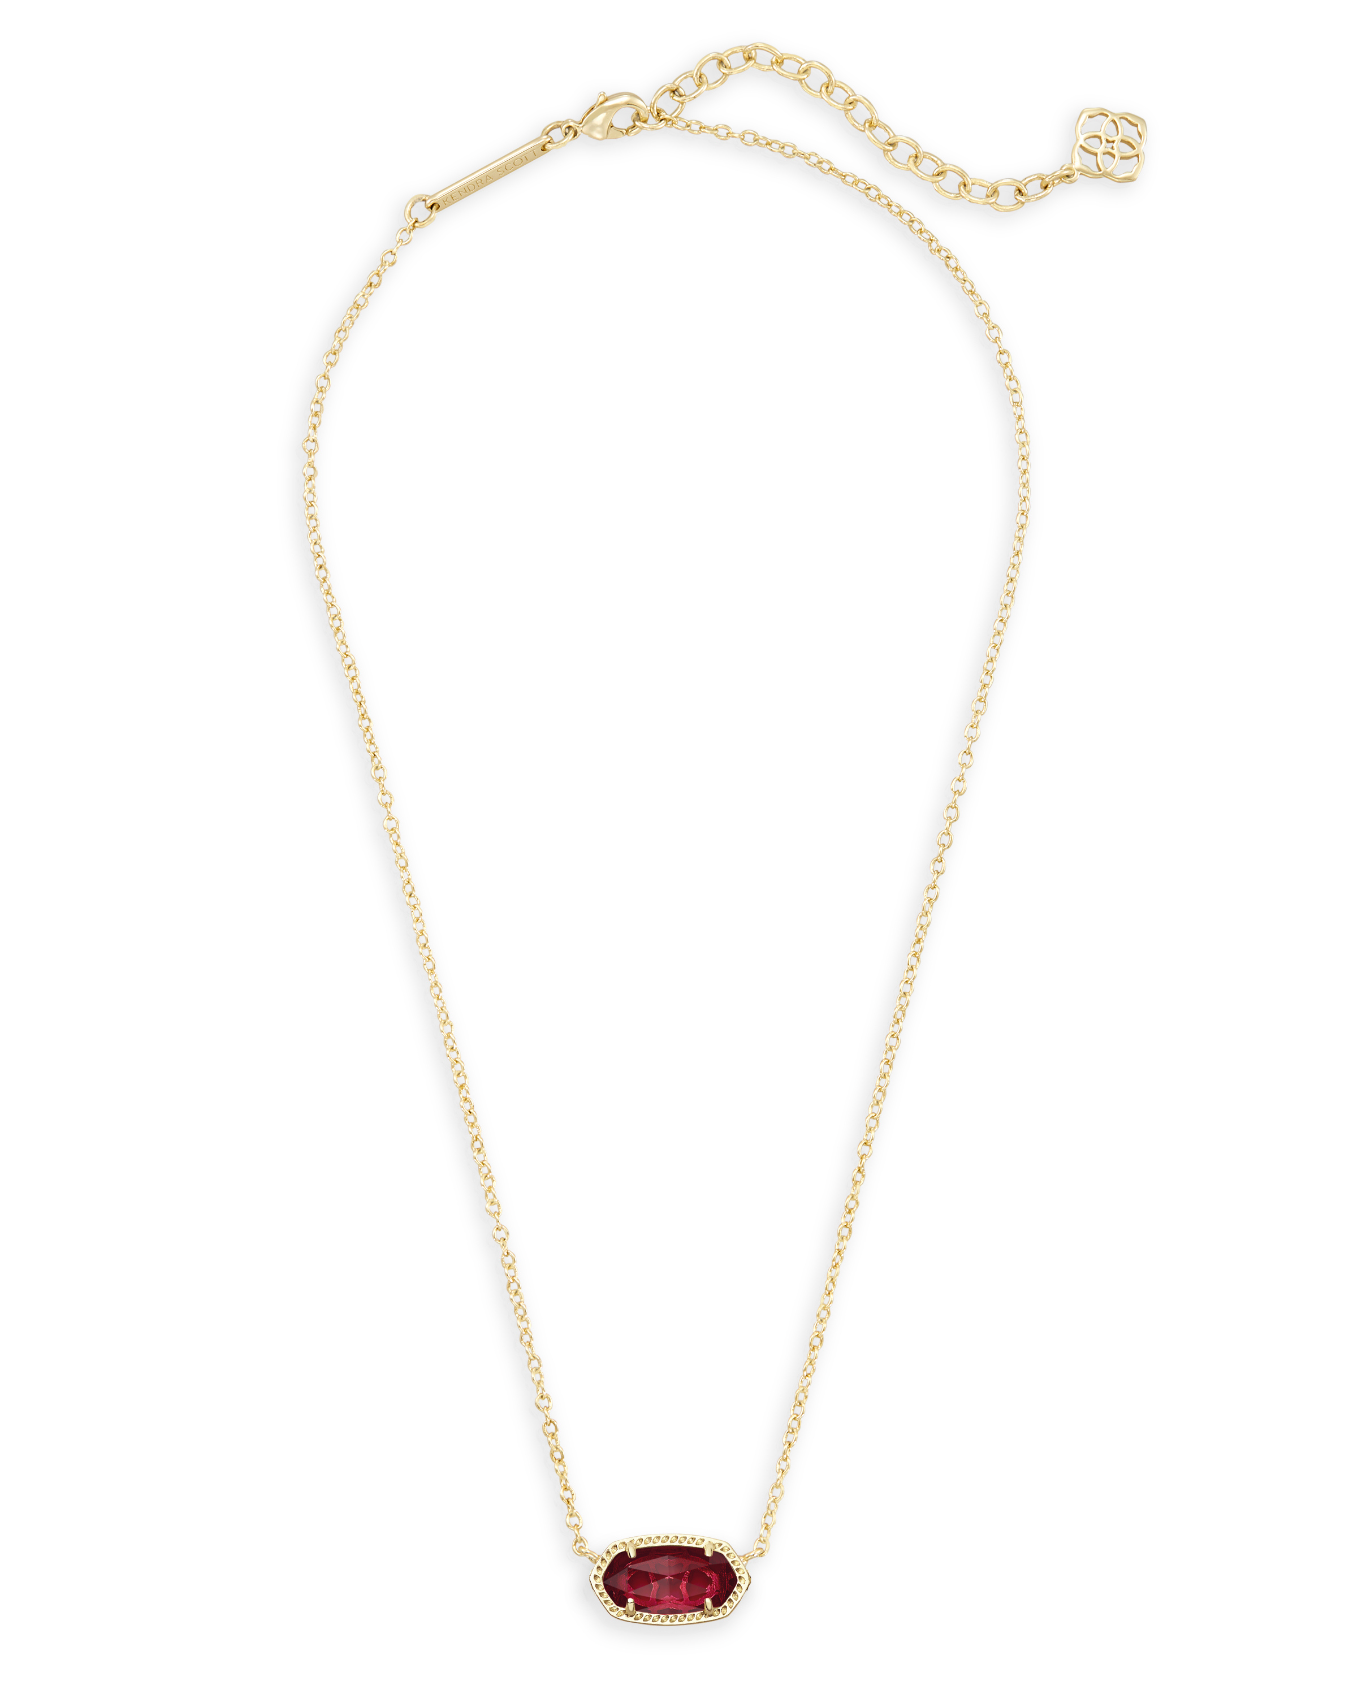 Elisa Gold Pendant Necklace in Clear Berry | KENDRA SCOTT - The Street Boutique 